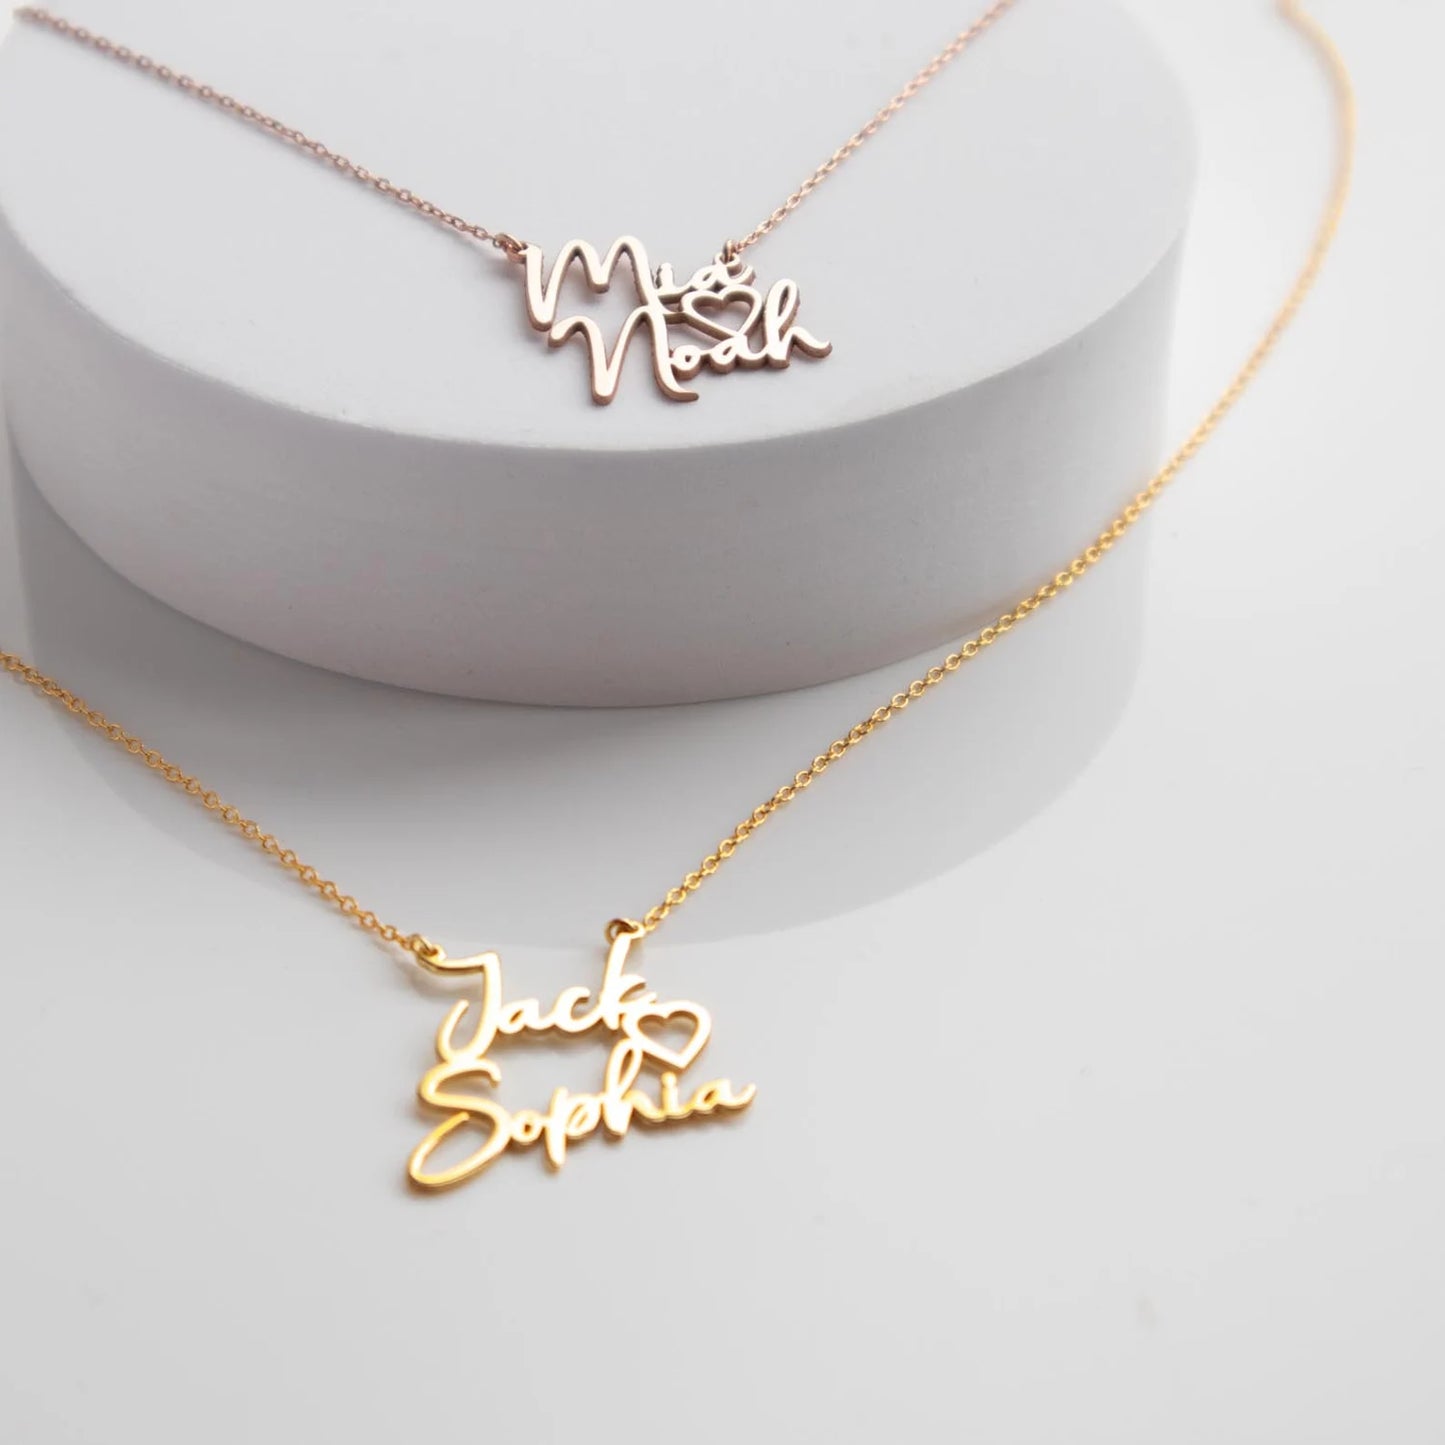 "Gold Two Names Necklace - A symbol of personalized elegance by Burst of Arabia. Crafted with precision, this exquisite piece adds a touch of individuality to your style. Order now for a uniquely cherished accessory."